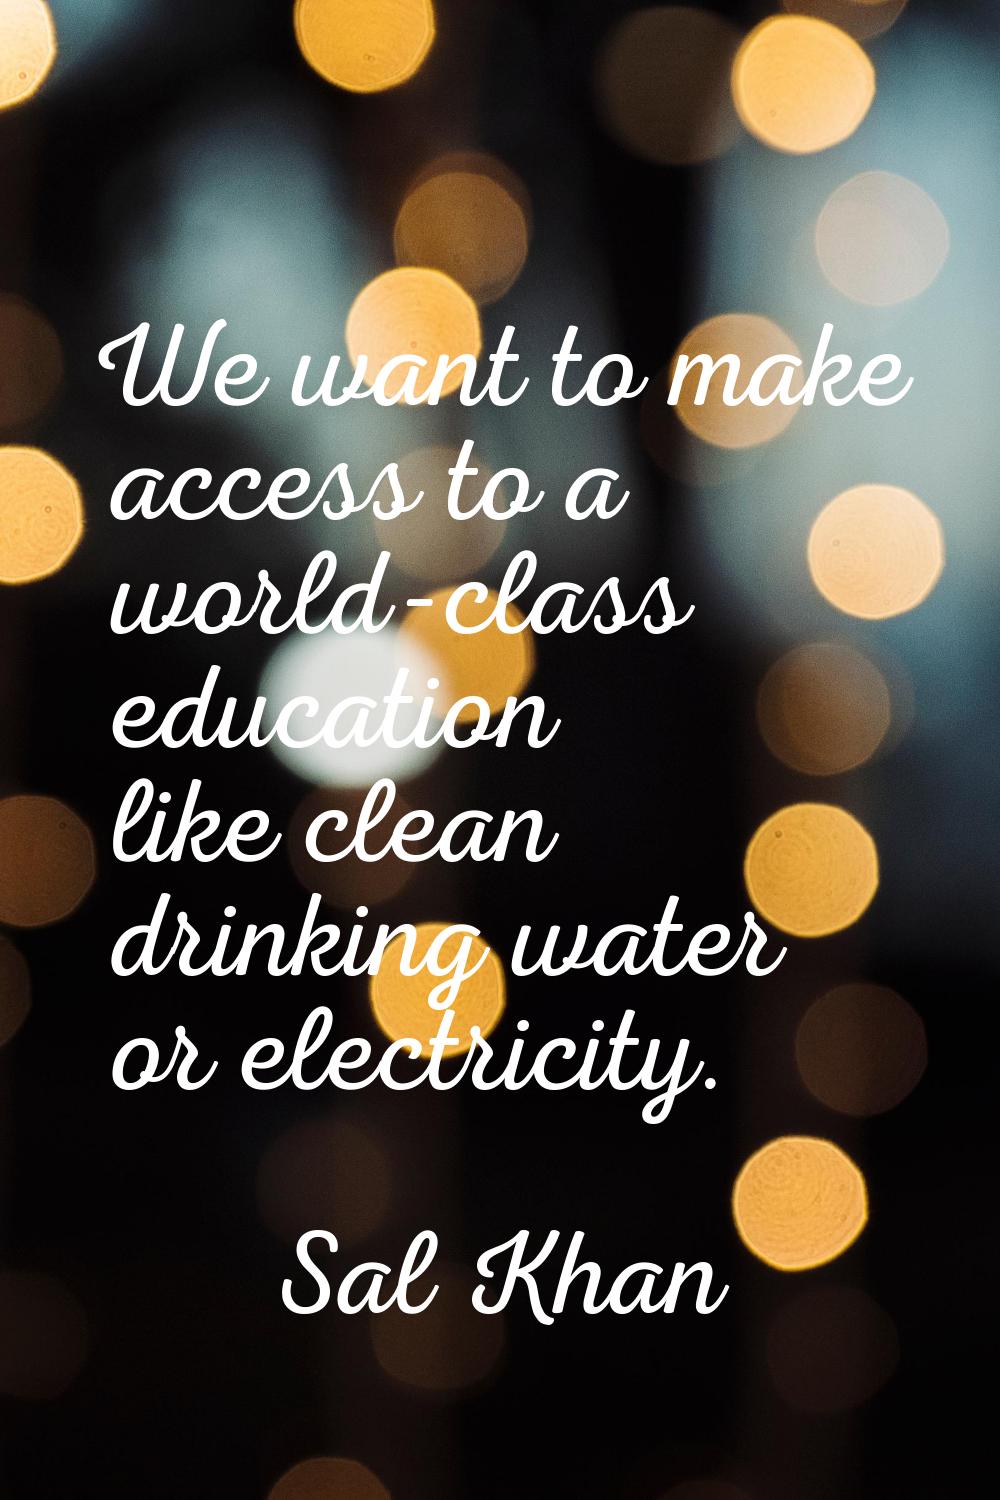 We want to make access to a world-class education like clean drinking water or electricity.